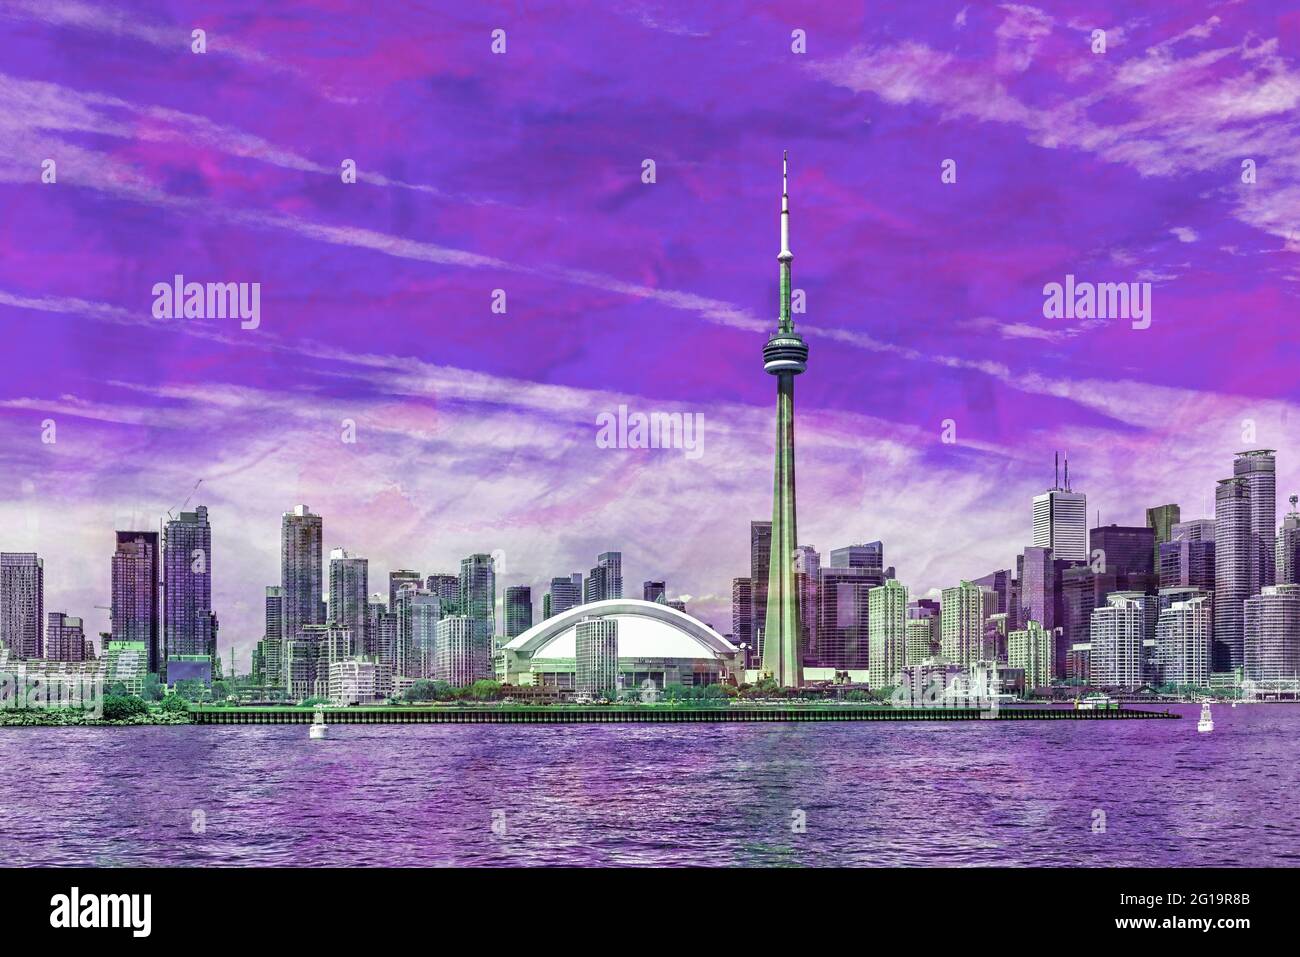 The Toronto city skyline during the daytime and seen from the Lake Ontario, Canada Stock Photo